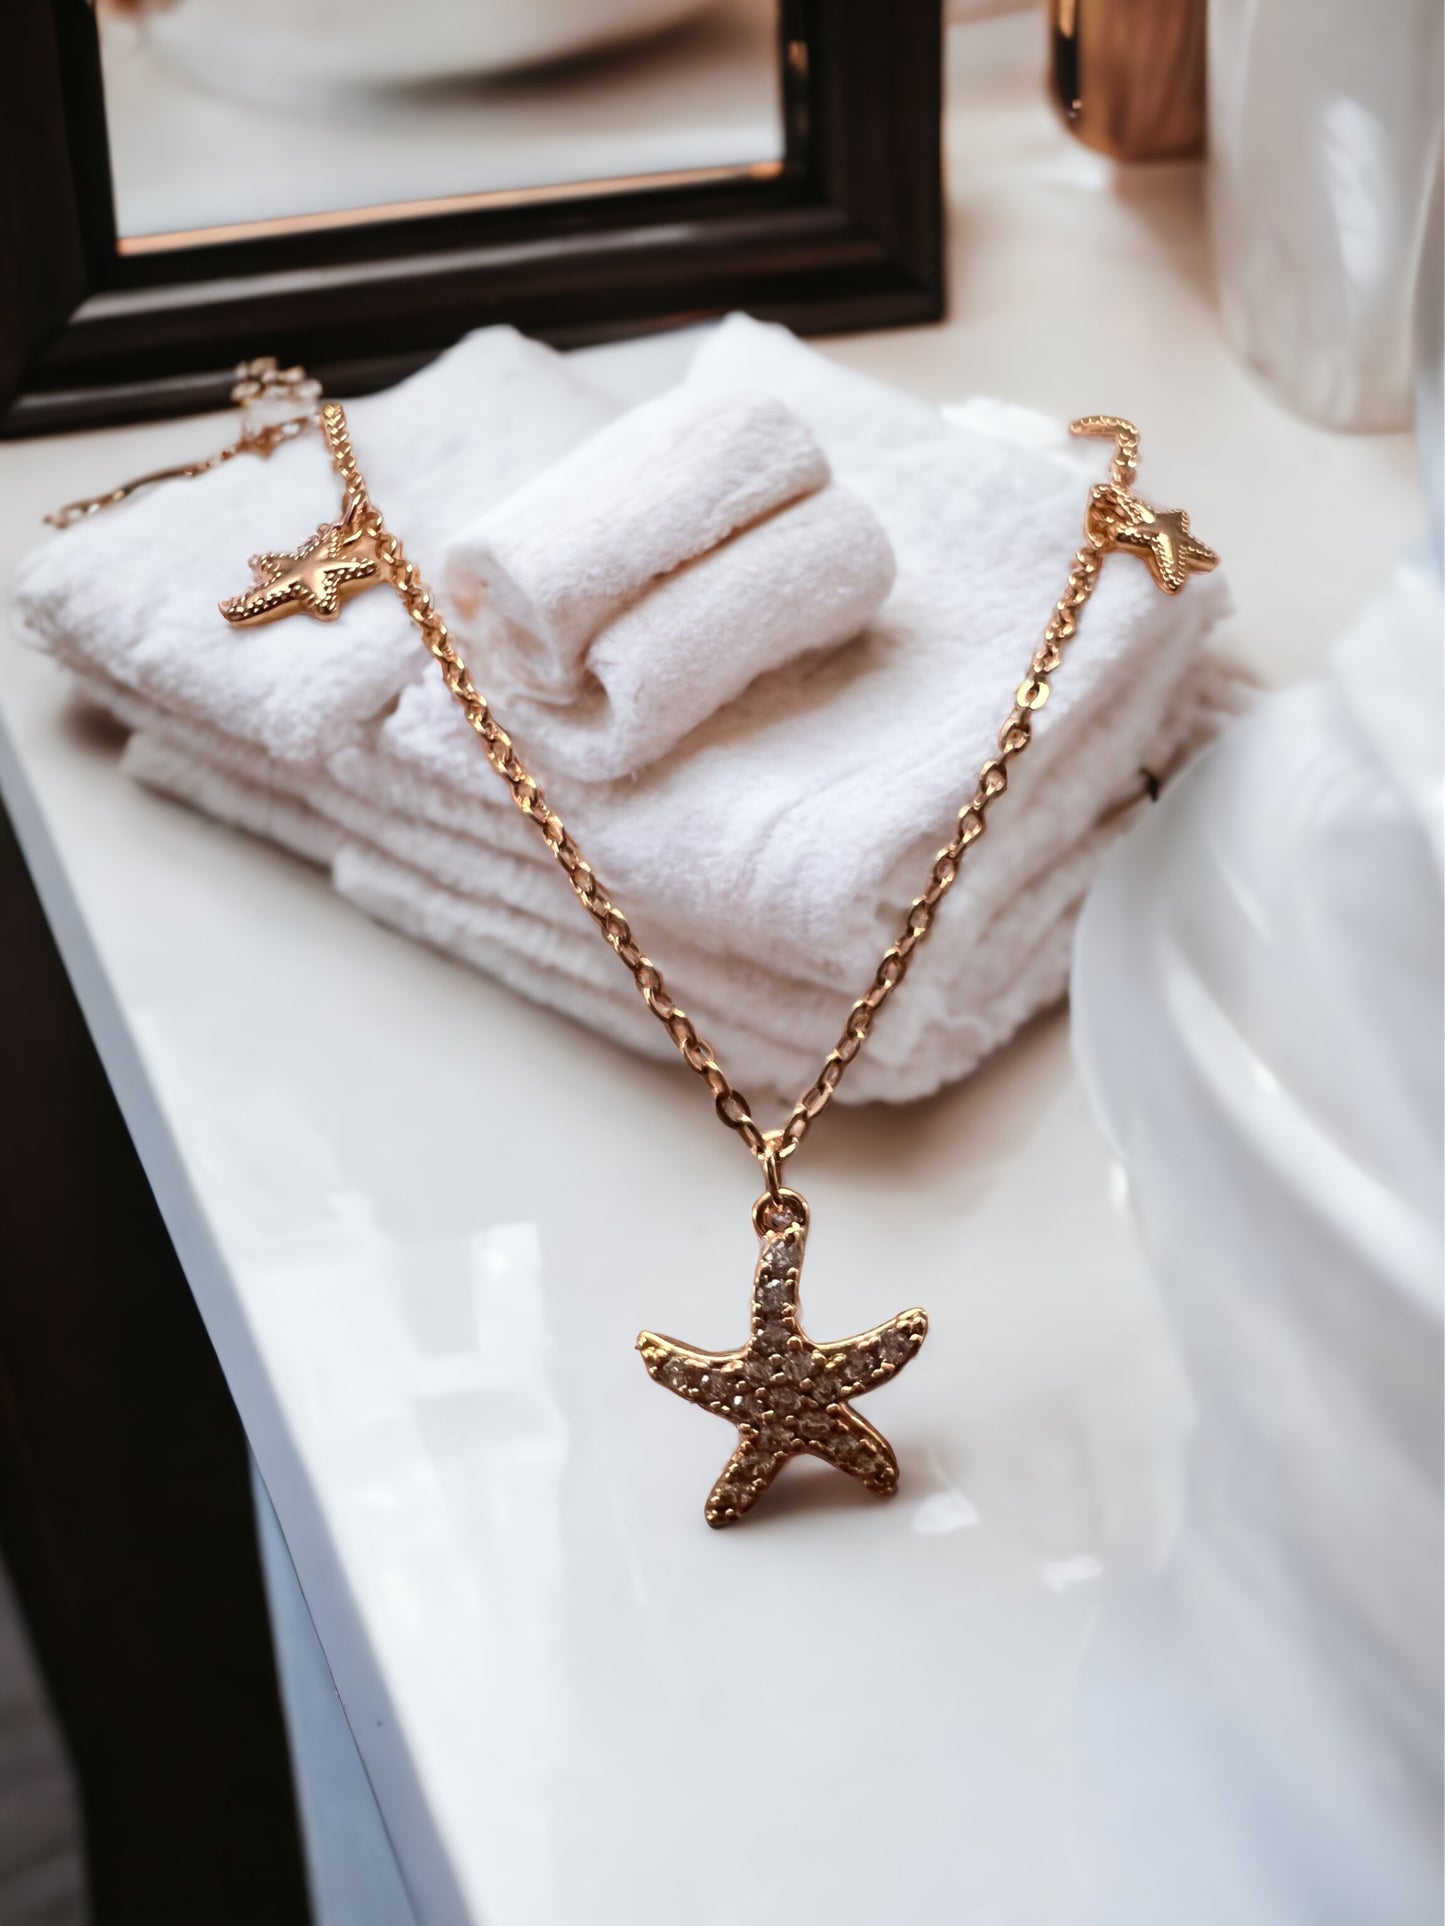 Underwater Elegance: Starfish Charm Gold-Plated Bracelets - Elevate Your Style with Nautical Inspired Fashion Jewelry